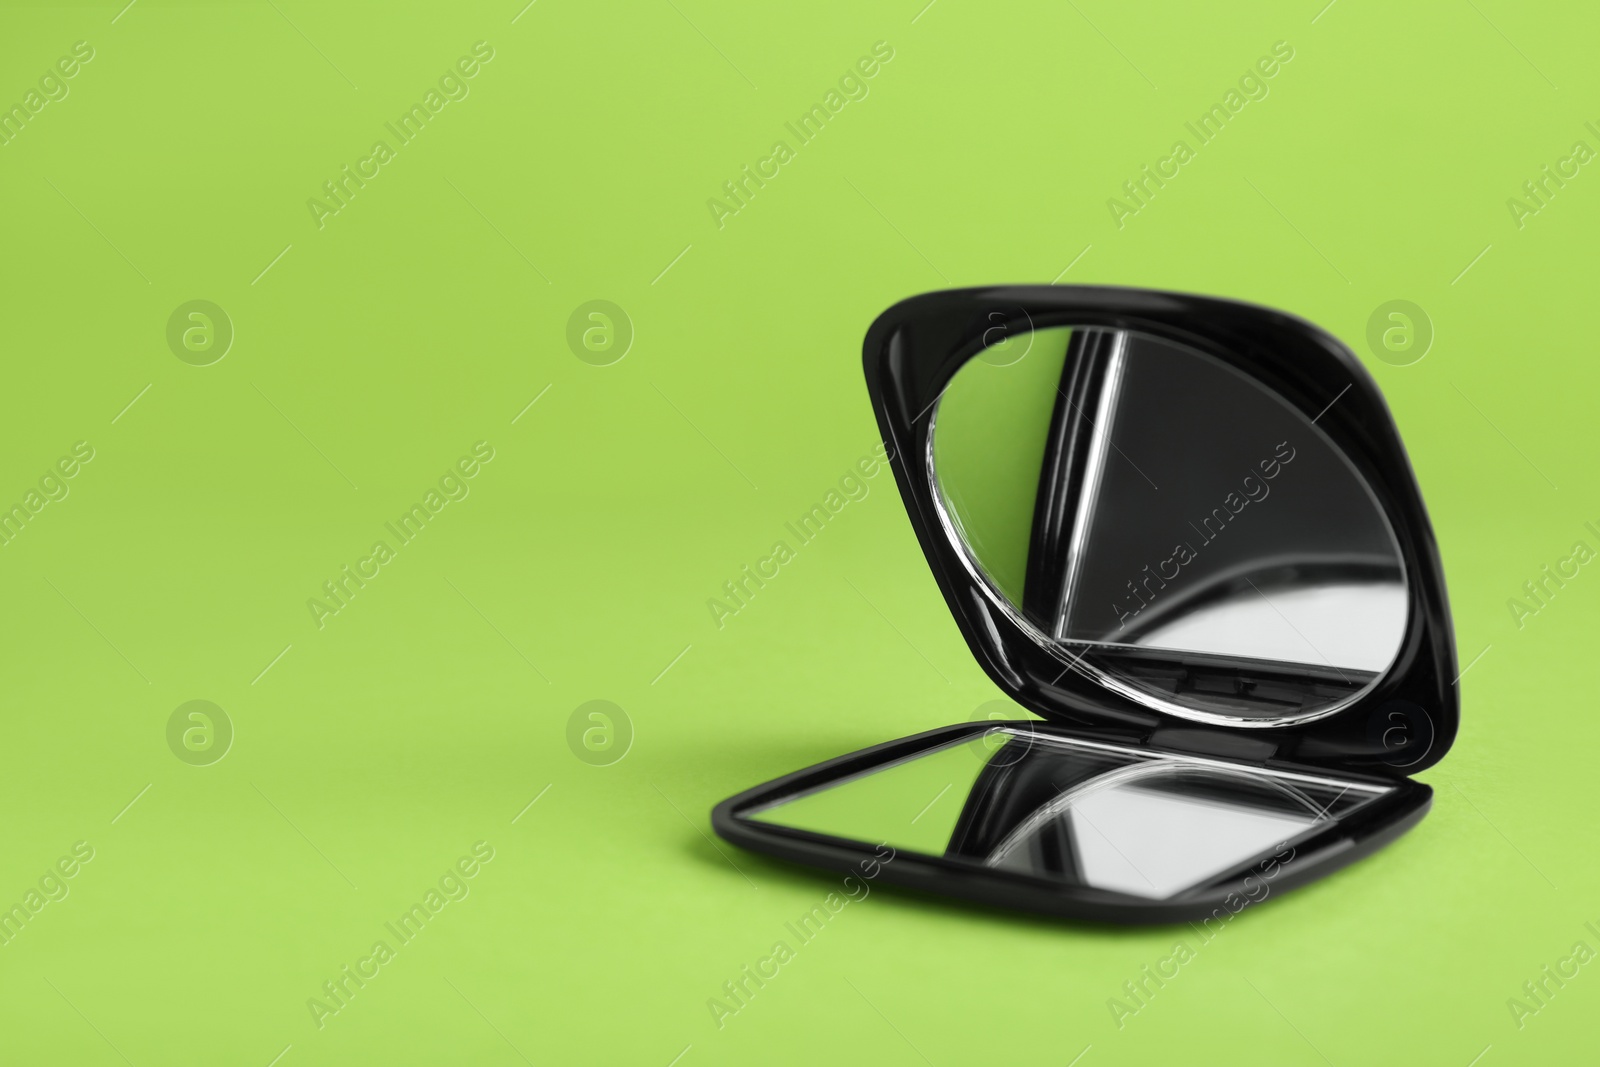 Photo of Stylish cosmetic pocket mirror on light green background. Space for text